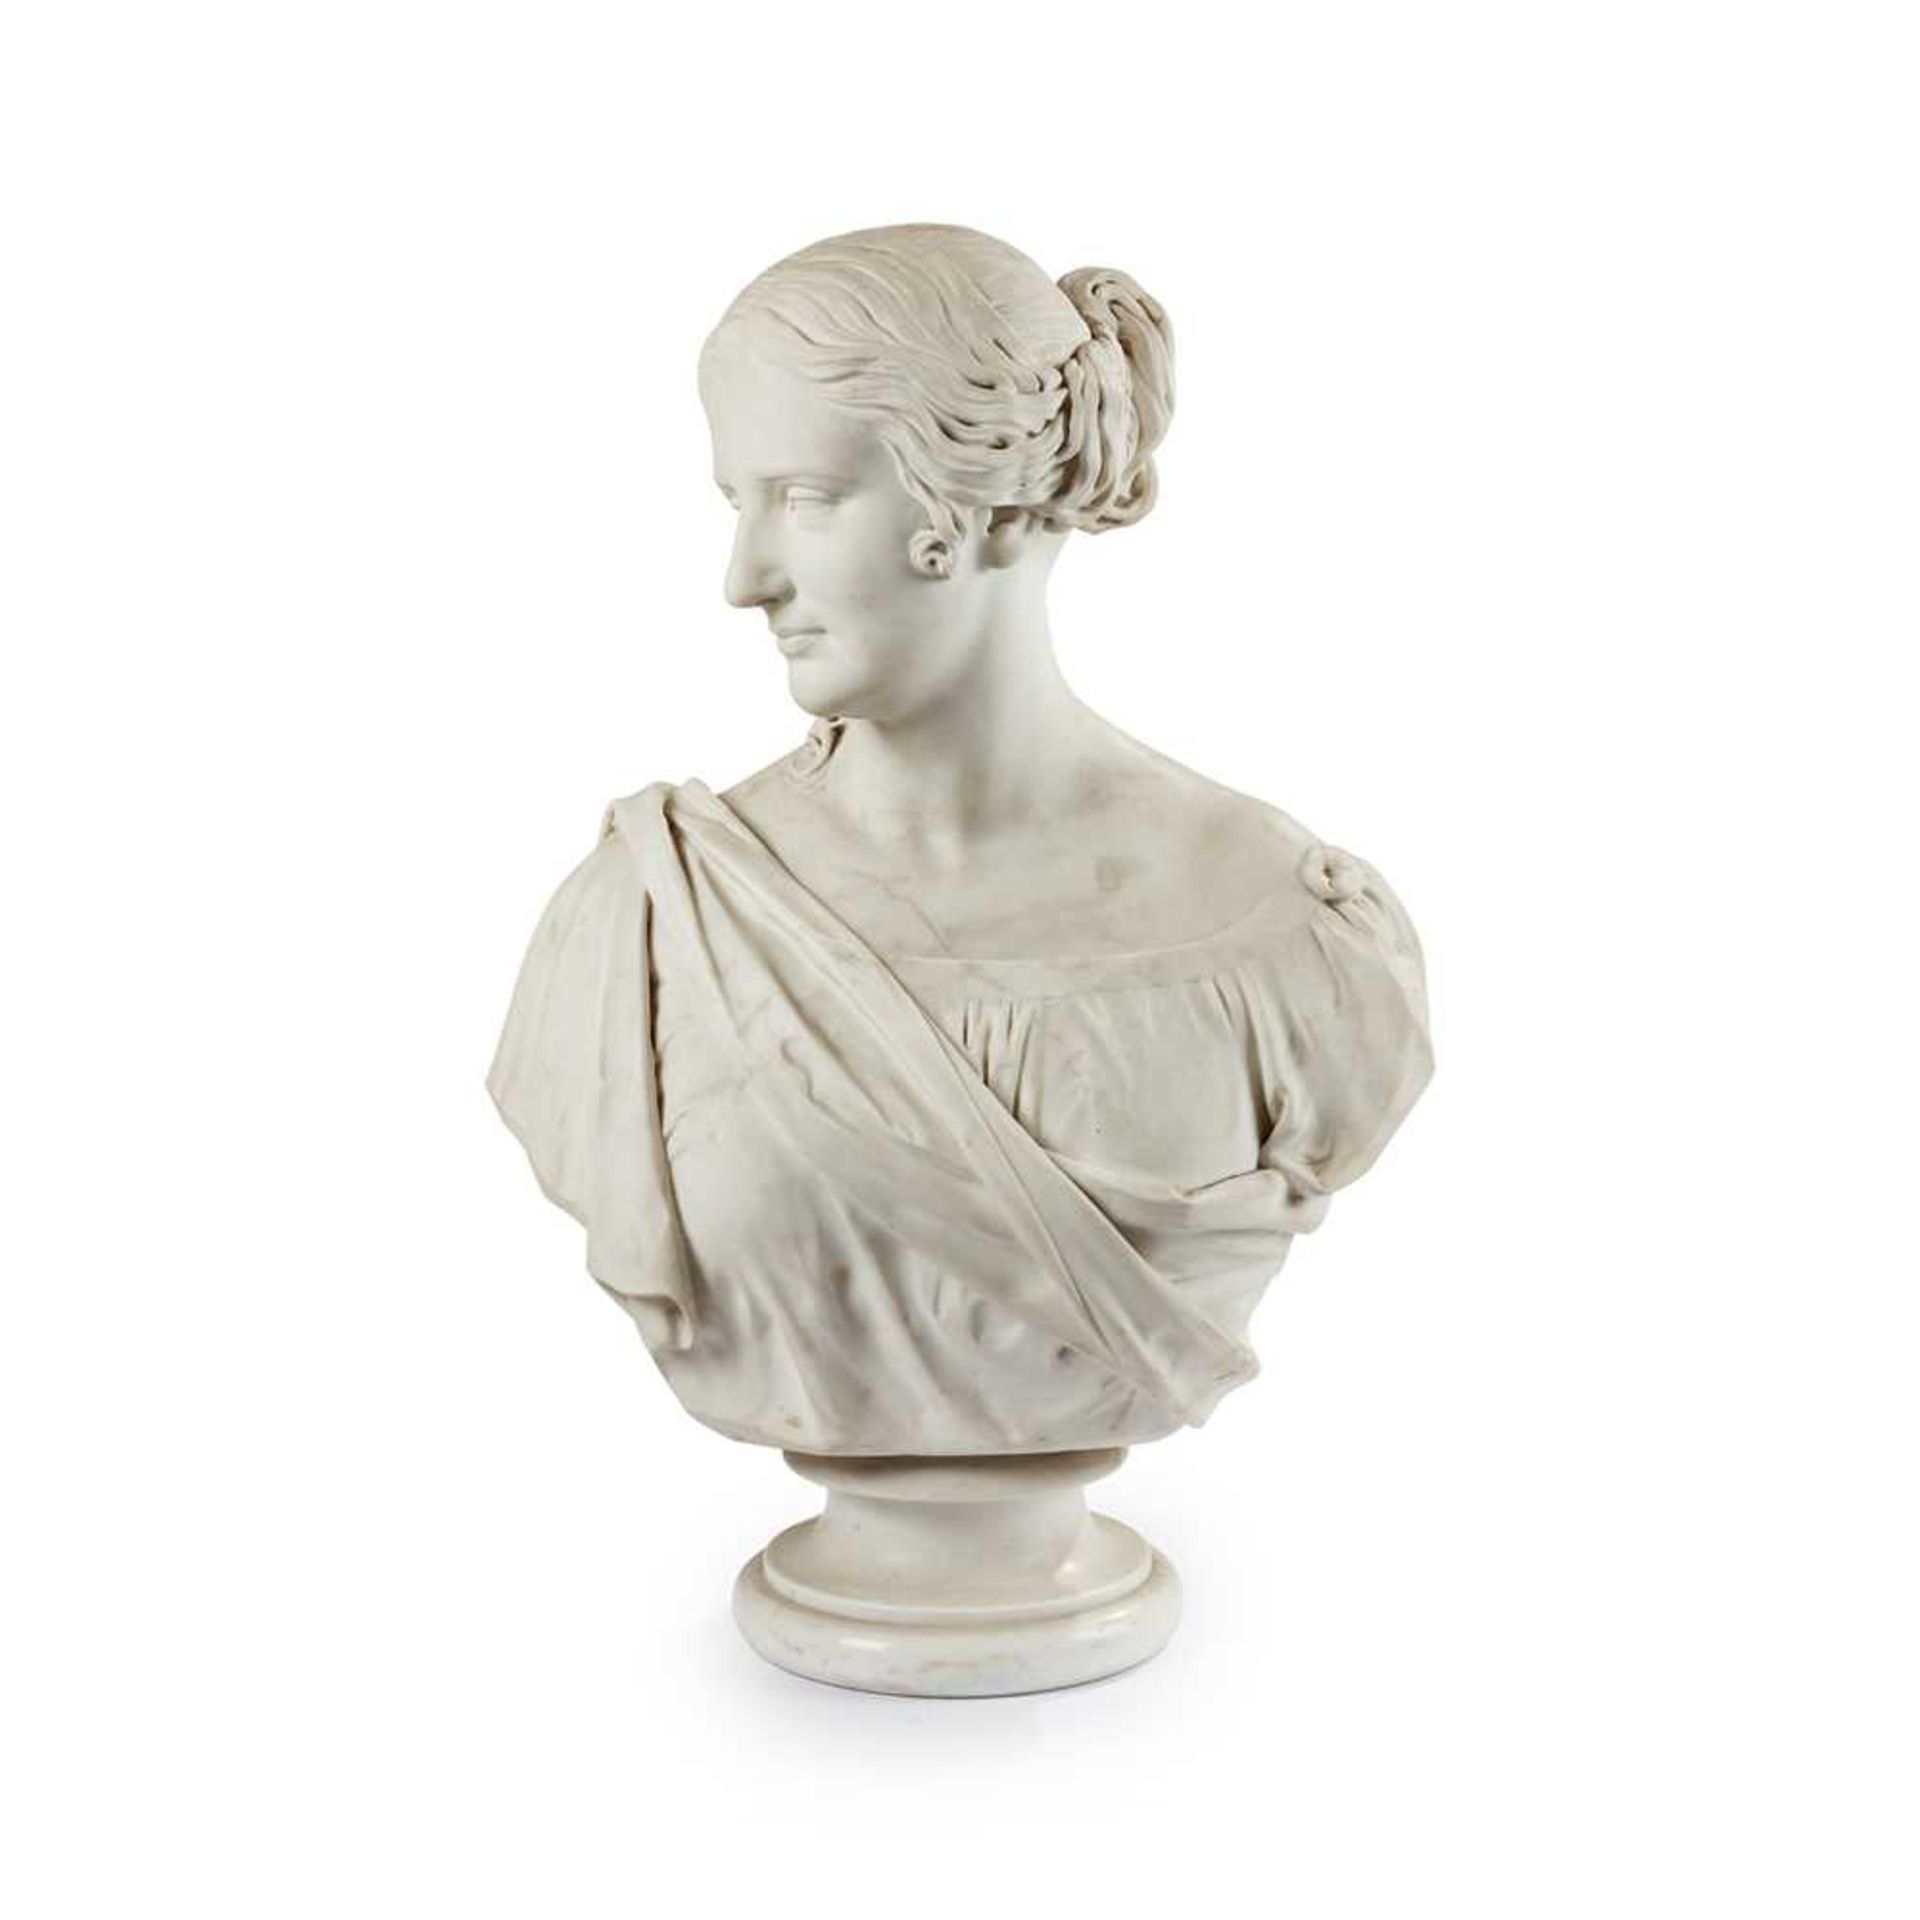 JAMES FILLANS (SCOTTISH 1808-1852) A PAIR OF WHITE MARBLE BUSTS OF JAMES AND JANE EWING OF STRATHLEV - Image 3 of 22